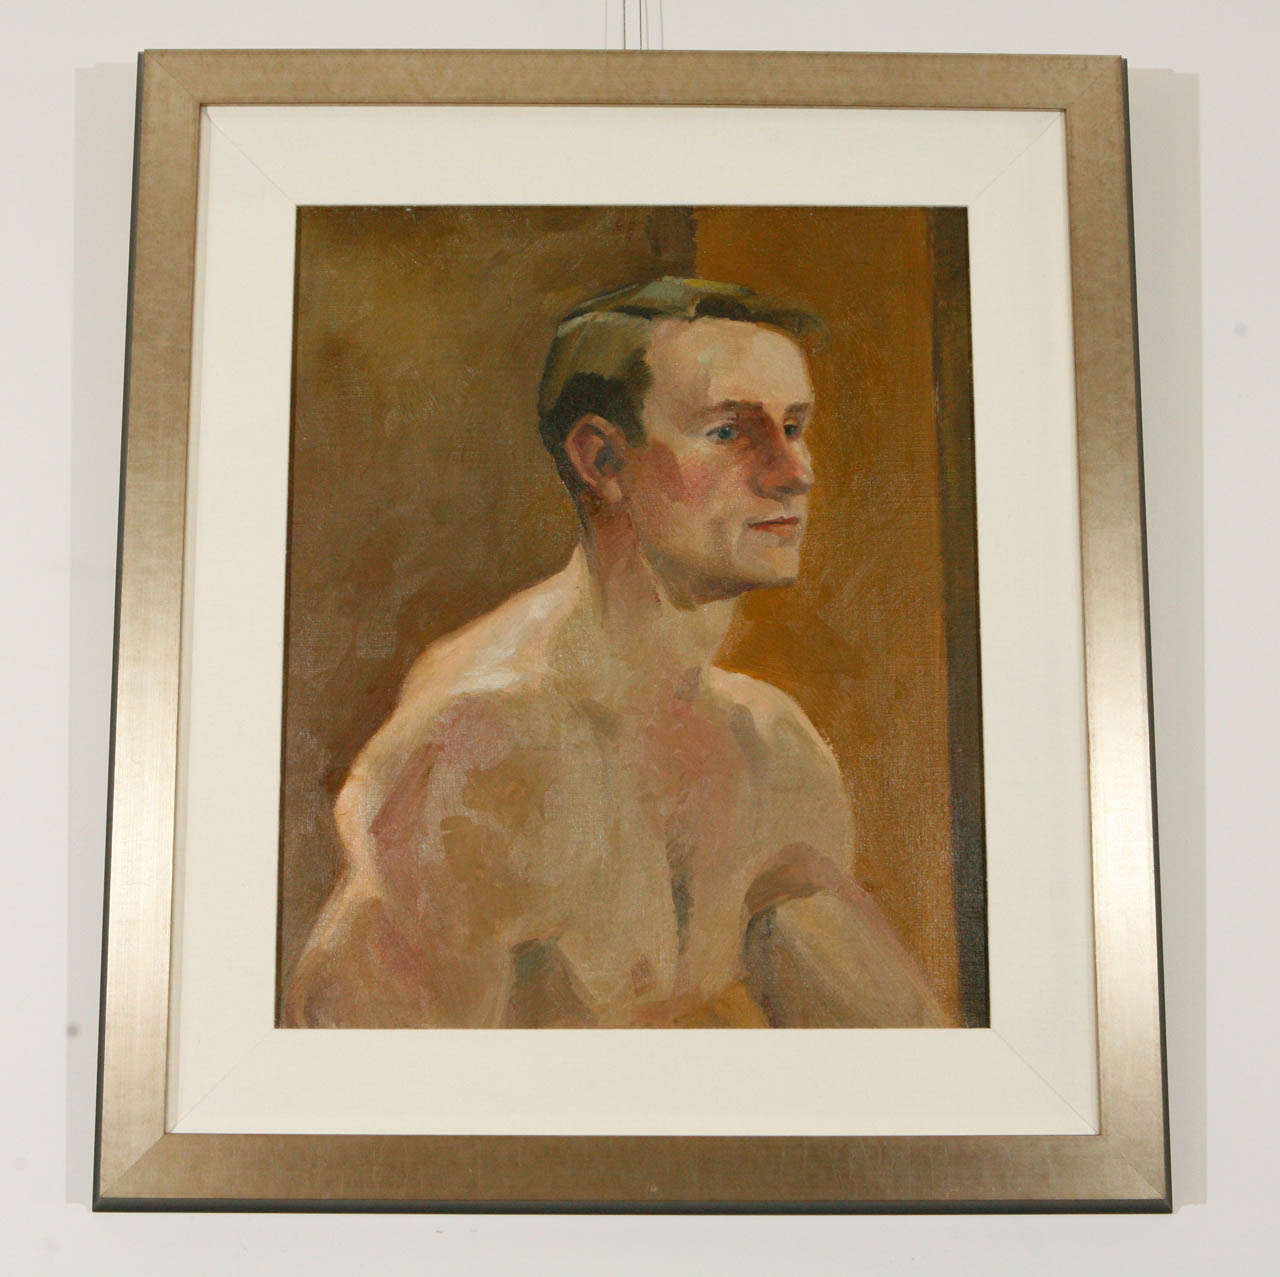 Vintage oil on canvas portrait of a man, c. 1940.  Custom matted in linen with a silver leafed frame.